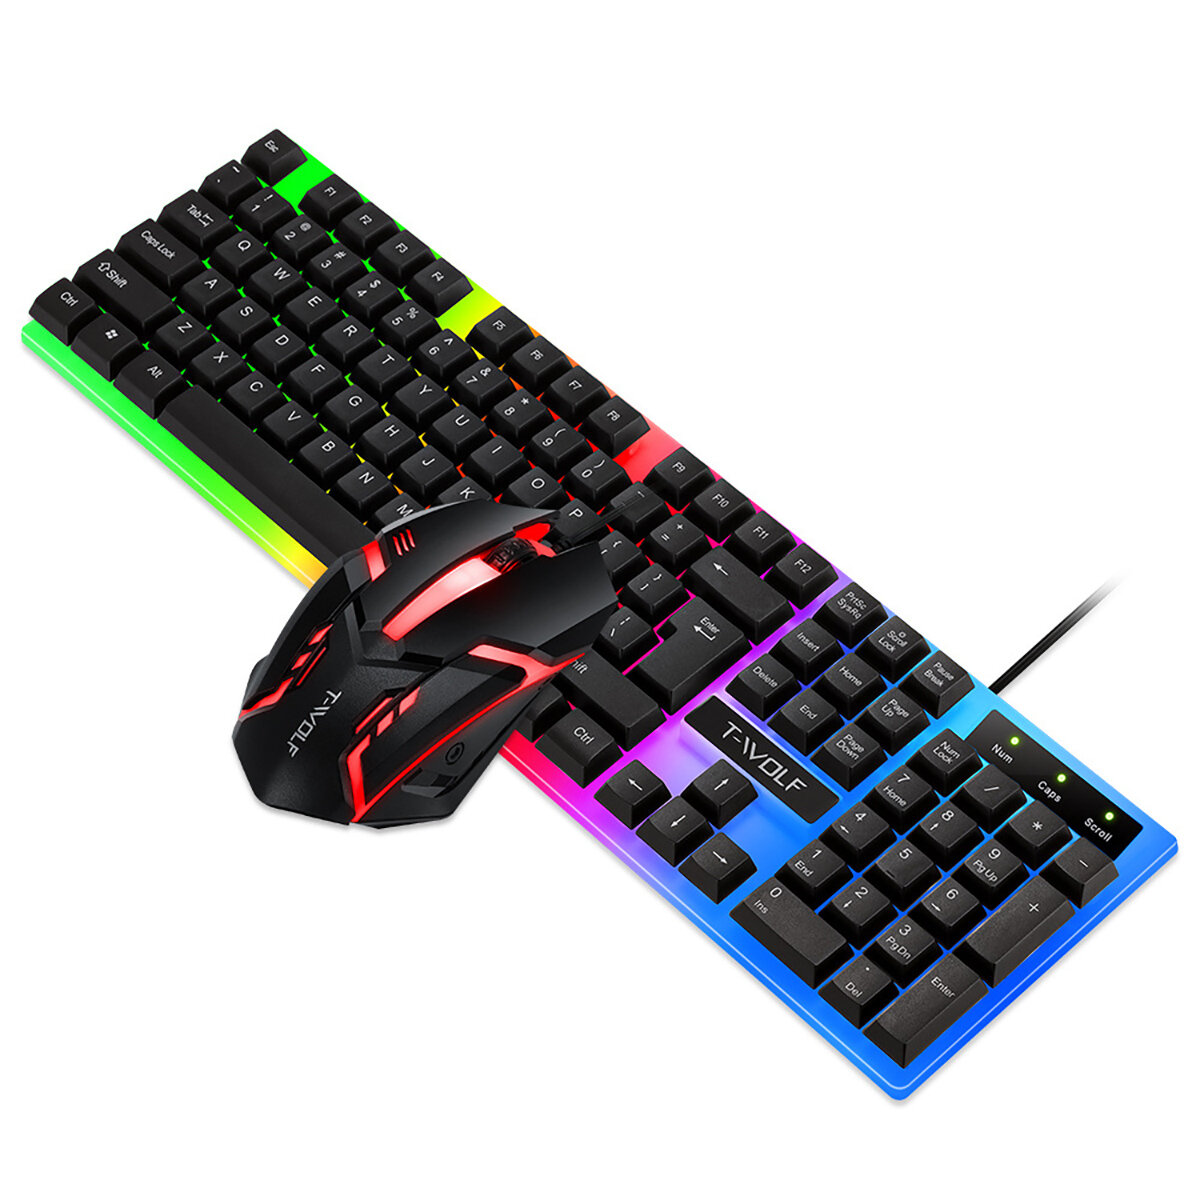 

TWOLF TF230 Wired Keyboard & Mouse Set 104 Keys USB Wired Suspended Keycaps Keyboard Ergonomic Mouse RGB Rainbow Backlit